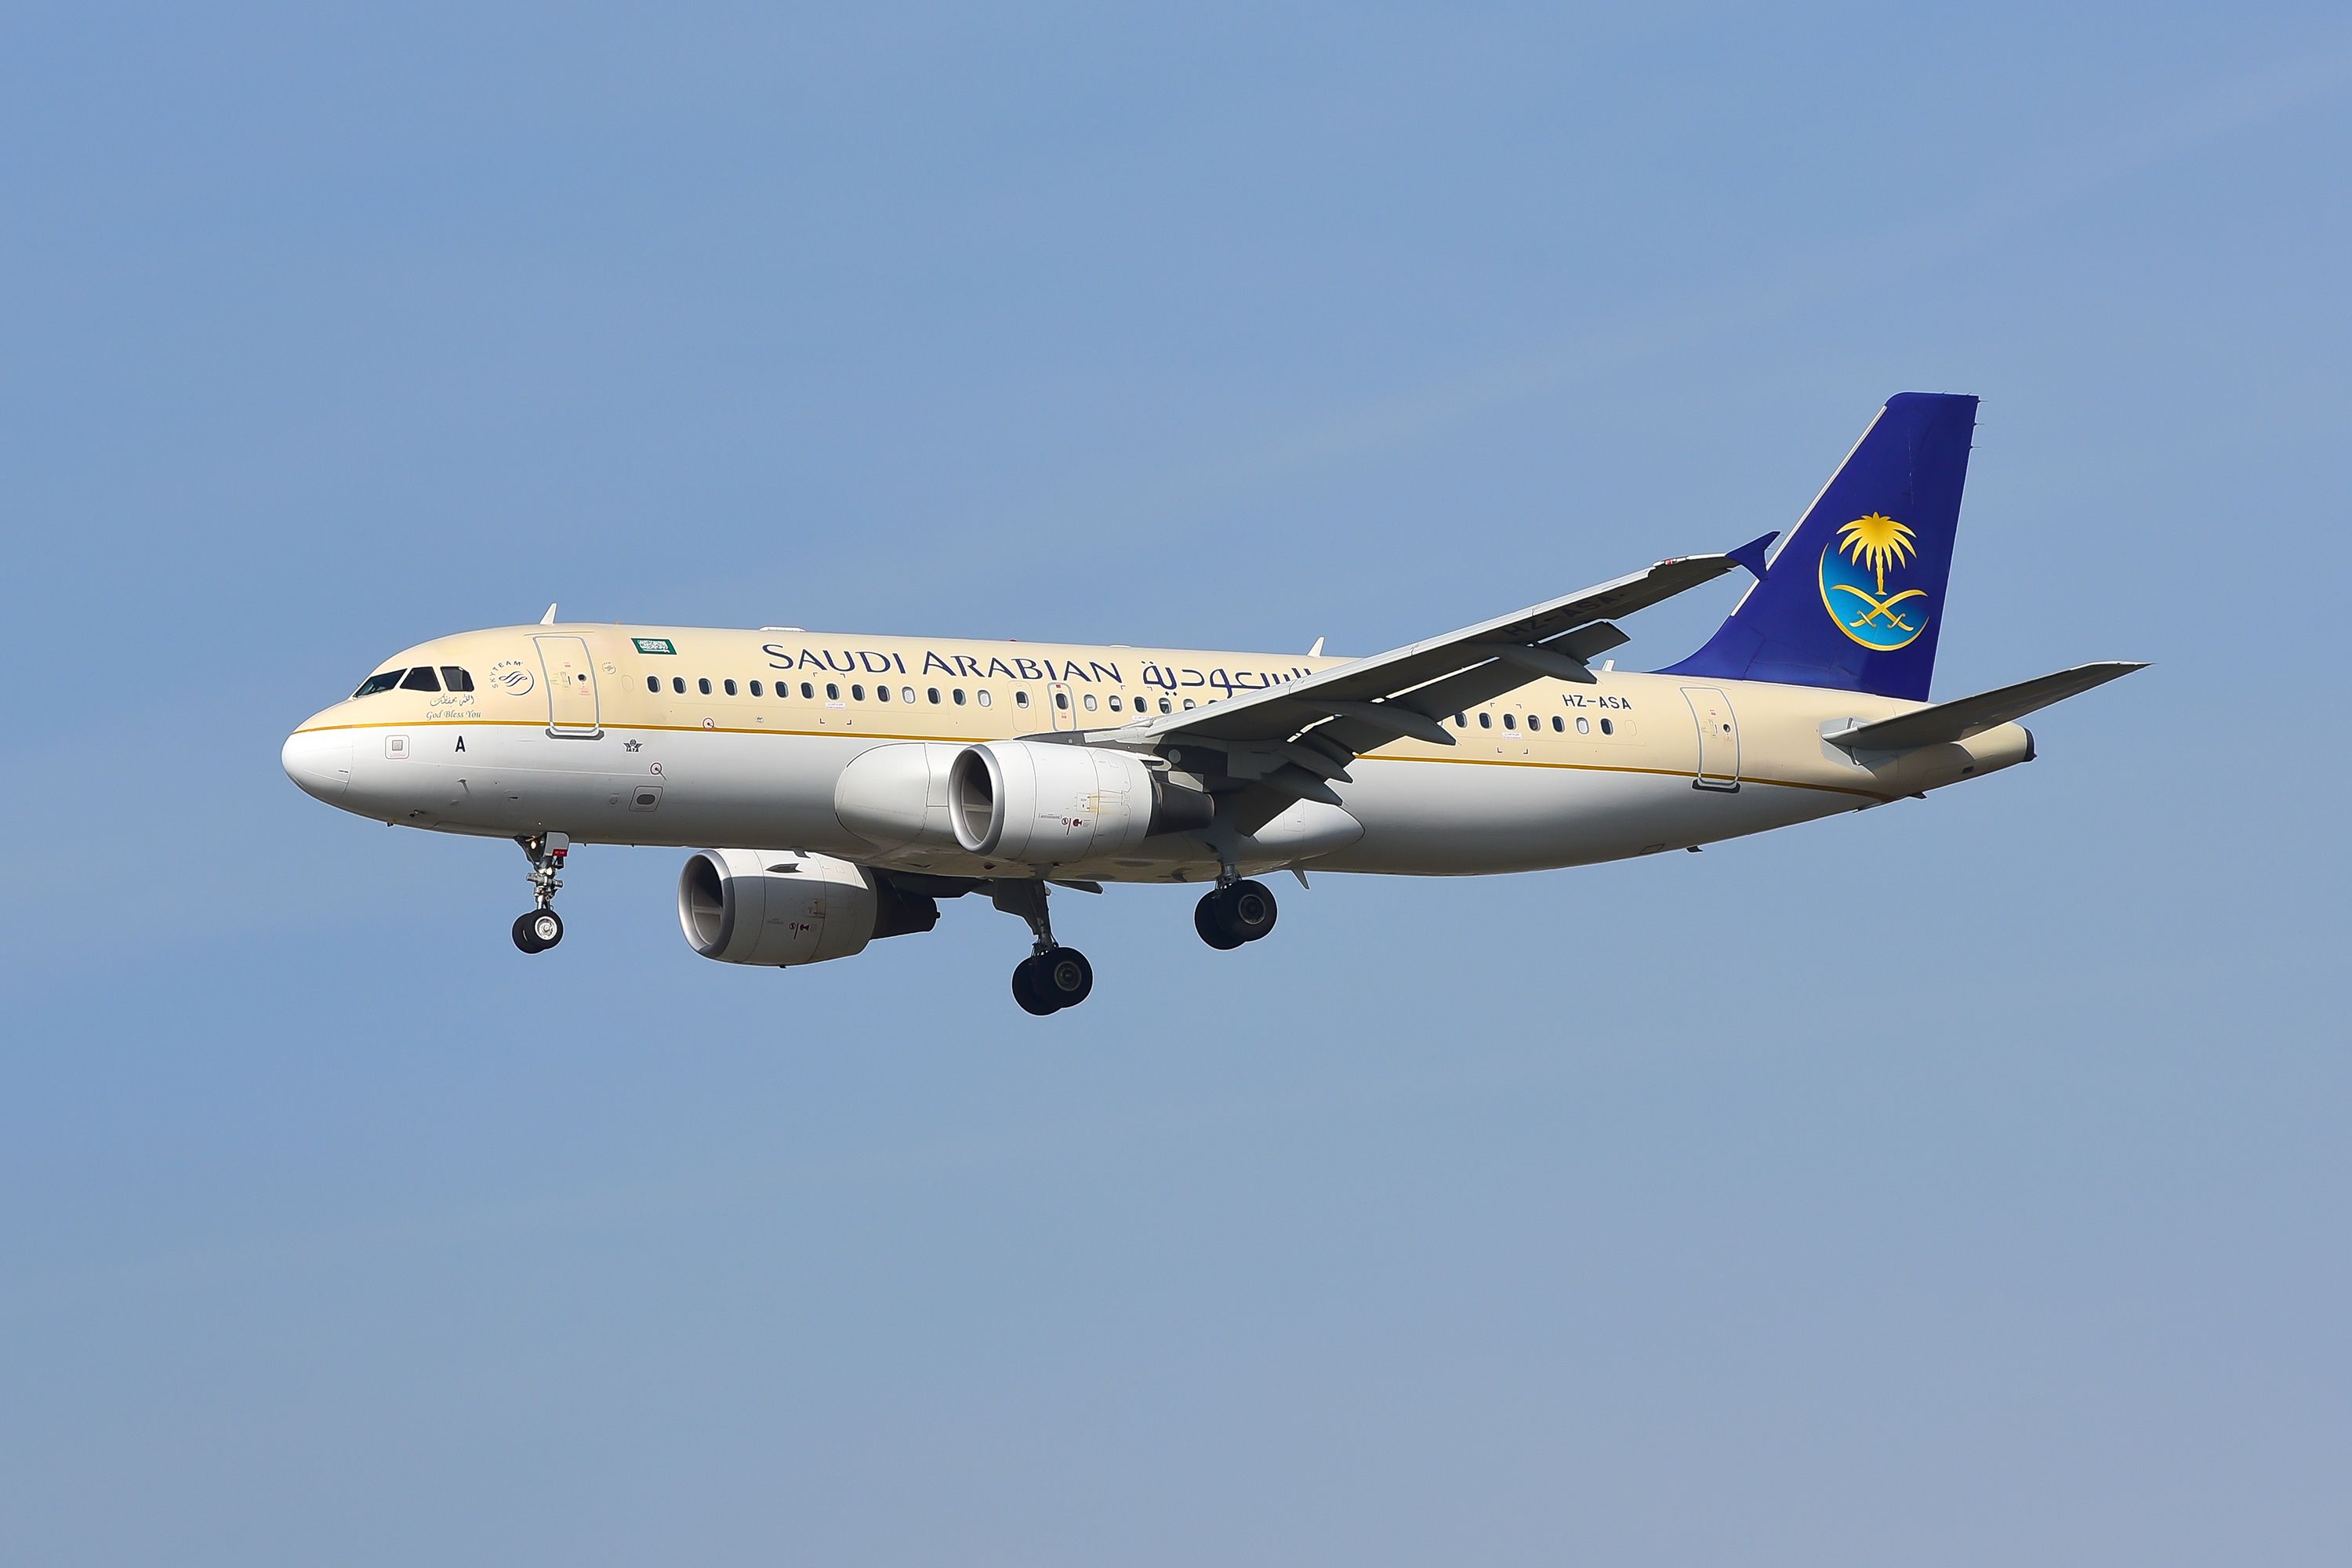 Saudi Arabian Airlines Airbus A320 on March 16,2017 in Frankfurt,Germany.